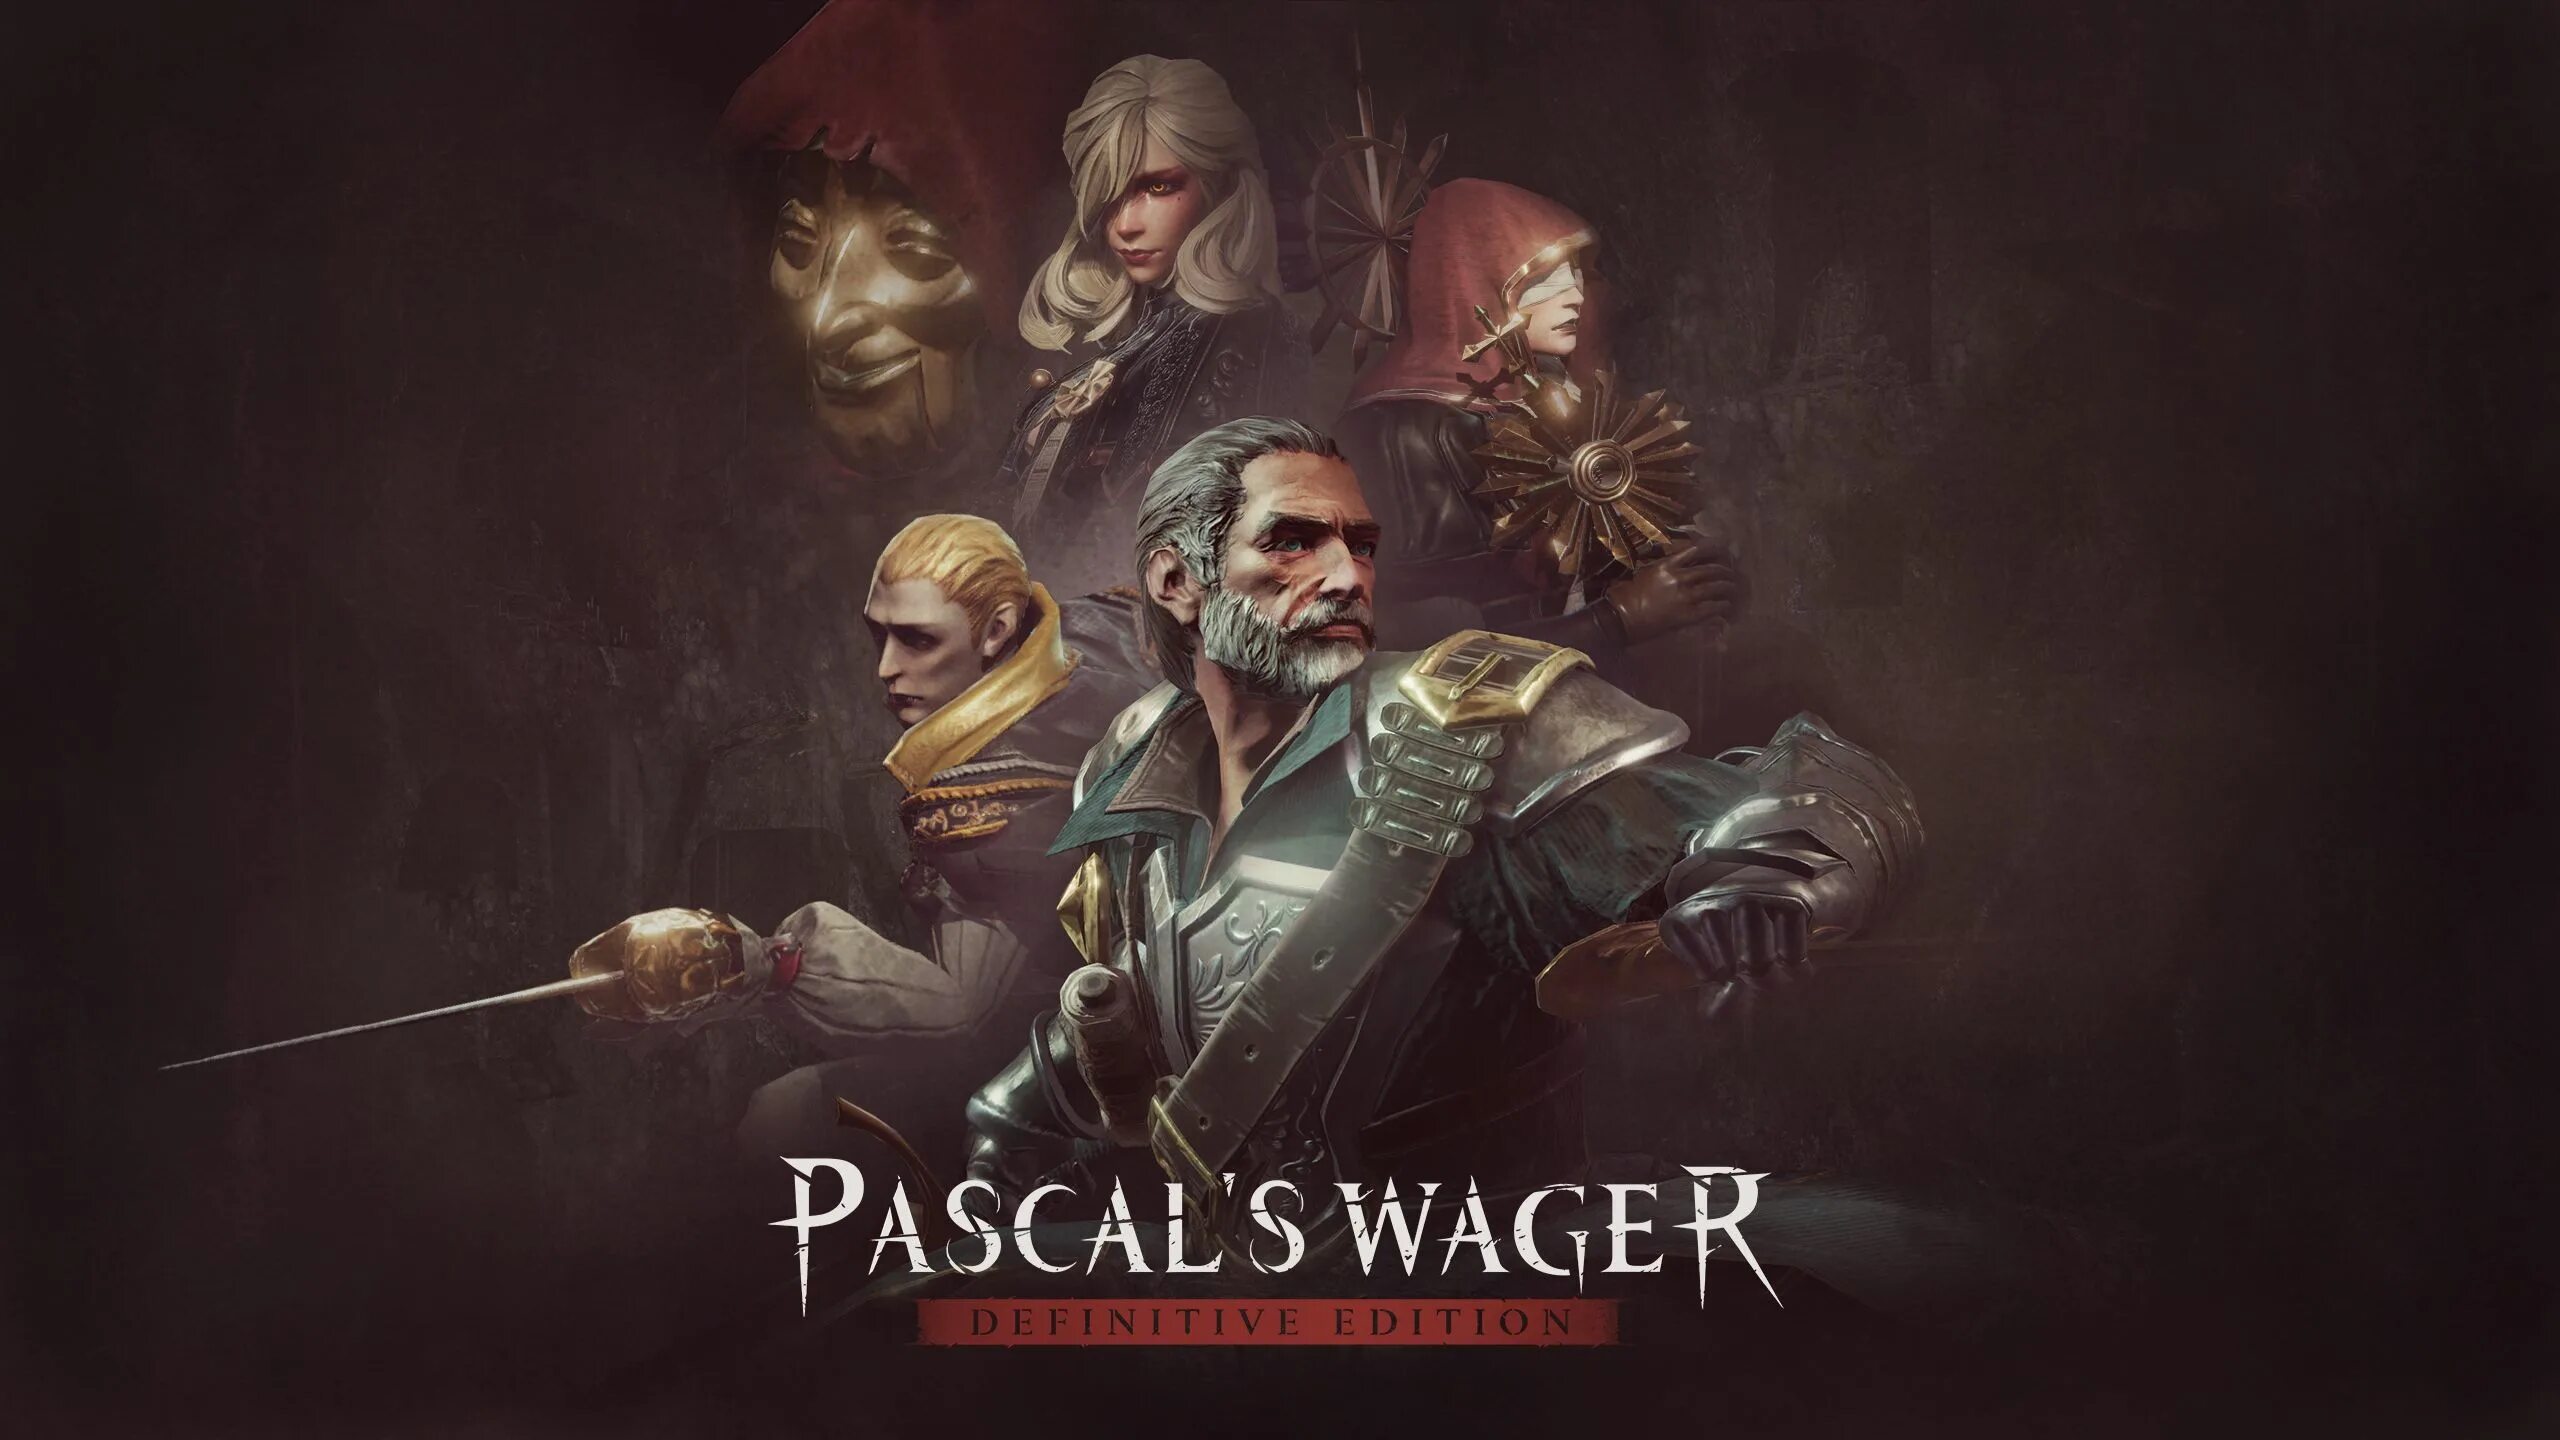 Pascal's Wager: Definitive Edition. Pascal's Wager: Definitive Edition (2021). Pascal Wager - 4pda. Pascal's Wager: Definitive Edition обложка. Pascals wagner